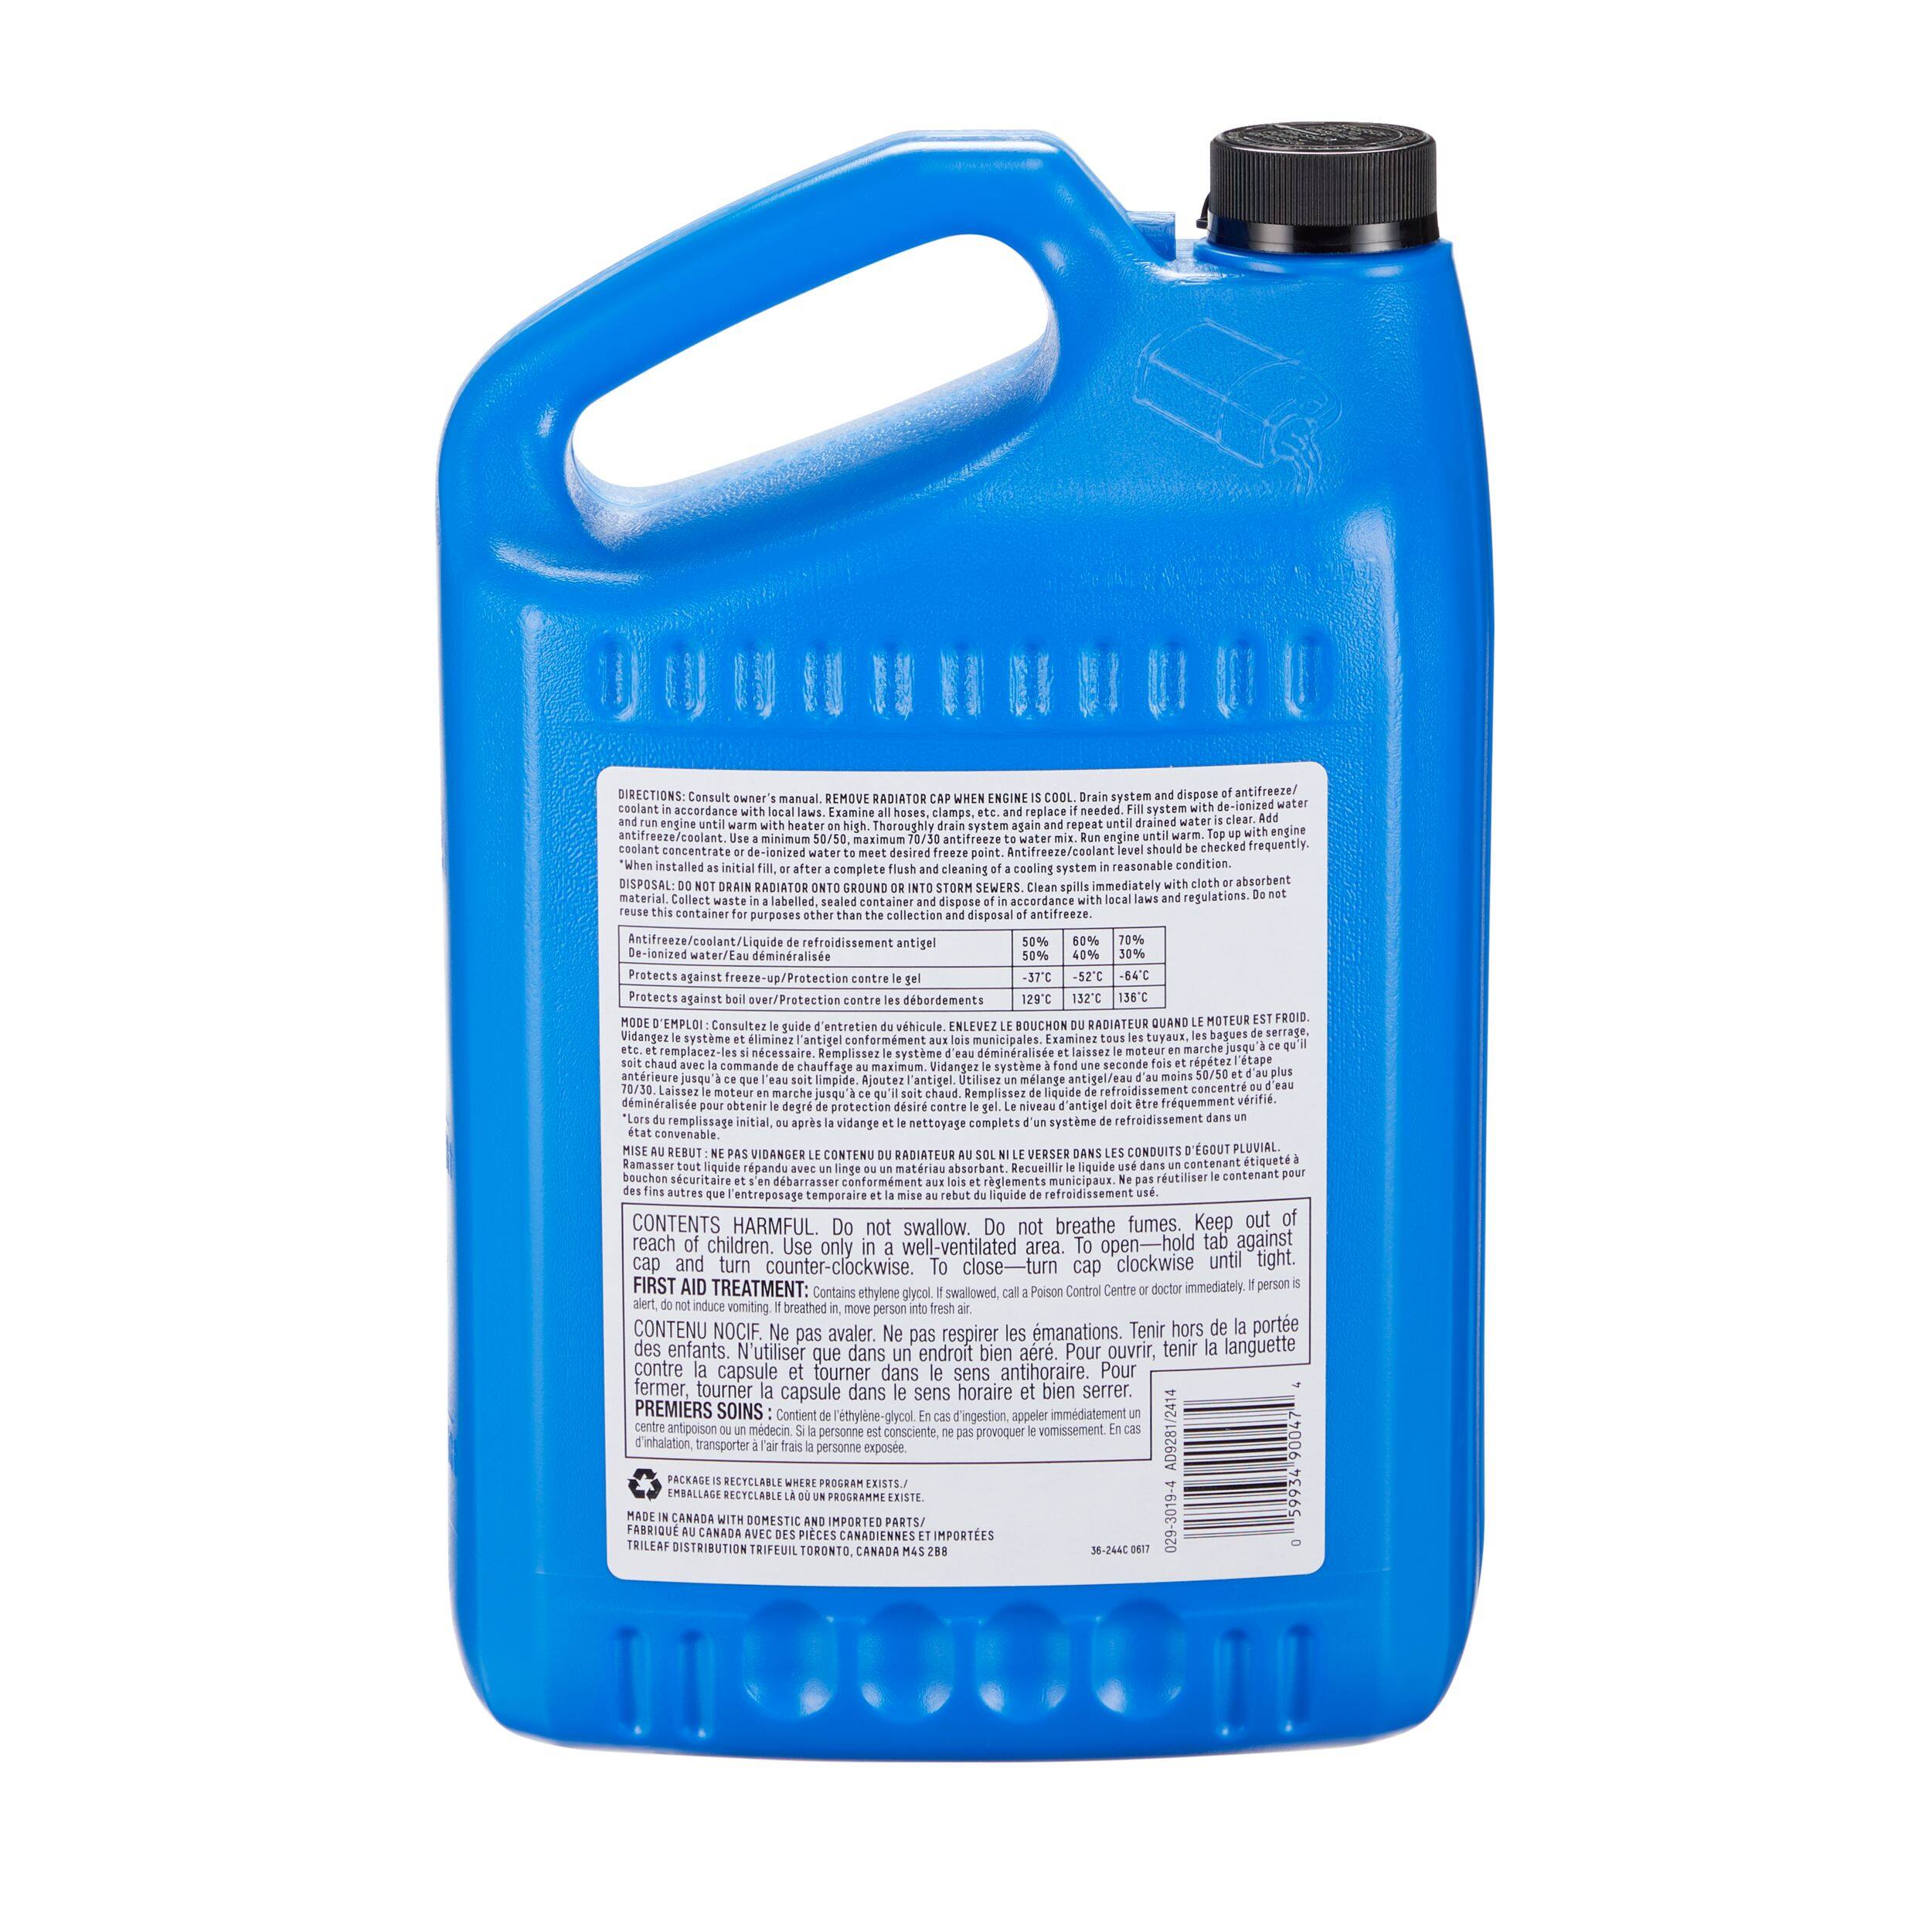 Certified Concentrated Anti-Freeze/Coolant, 3.78-L